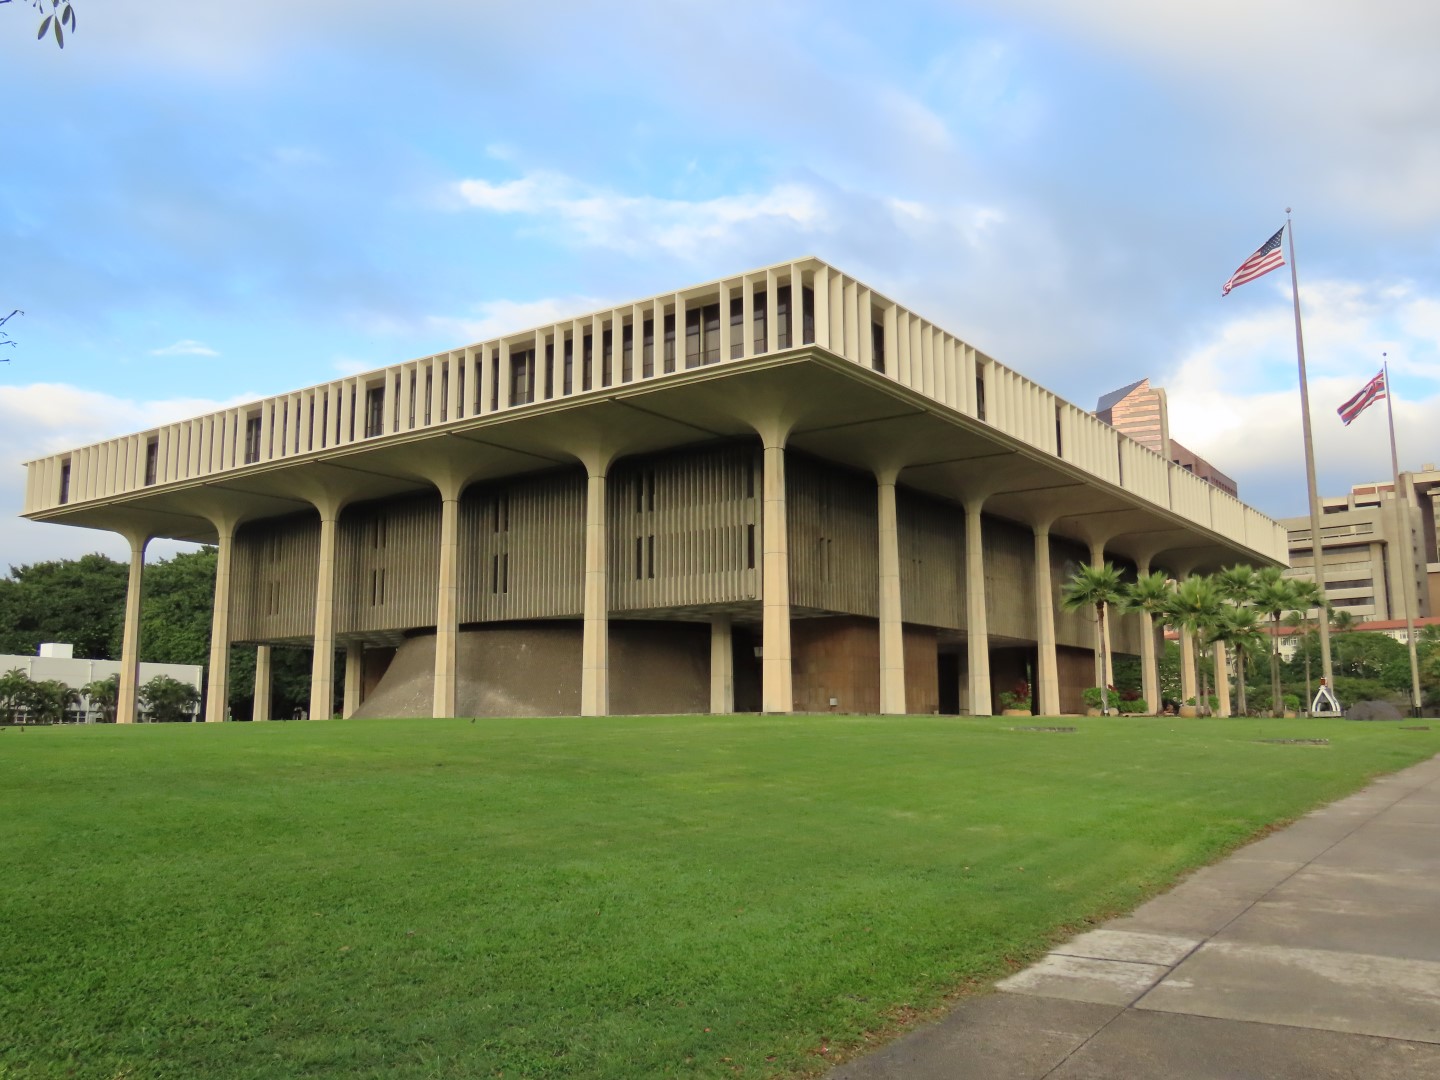 Hawaii State Capitol Building #1 of 1